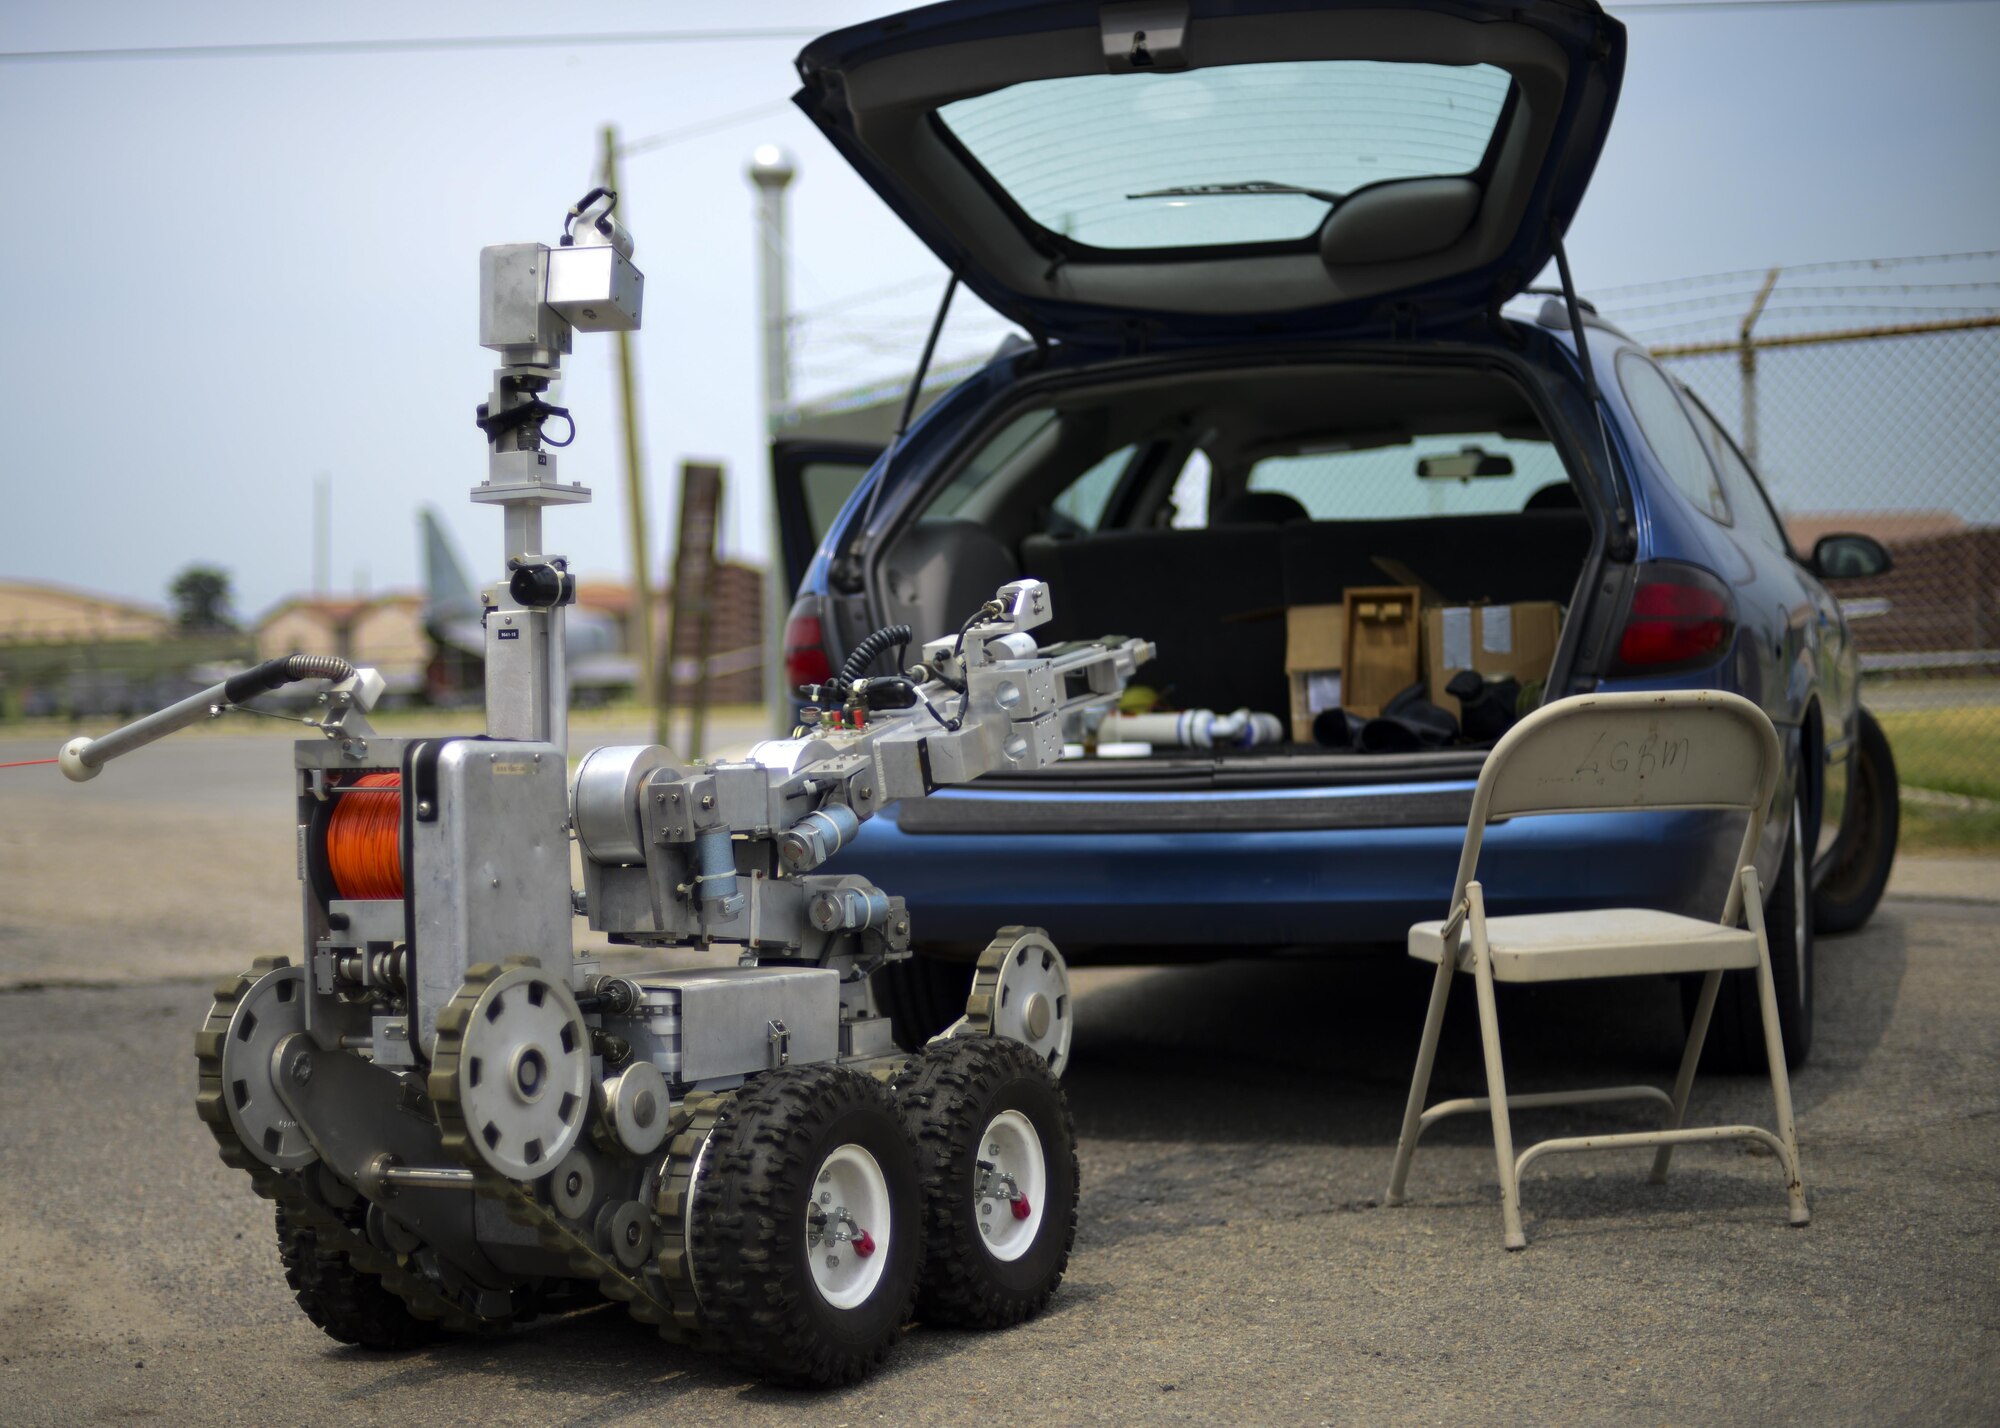 An Andros F6 robot is used to relay information to a remote explosive ordnance disposal team assigned to the 51st Civil Engineer Squadron during Exercise Beverly Herd 16-2 at Osan Air Base, Republic of Korea, Aug. 23, 2016. The robot uses several cameras to give its operators a clear view of what they are working on, and the EOD Airmen use exercises like these to hone their technical skills. (U.S. Air Force photo by Senior Airman Victor J. Caputo)